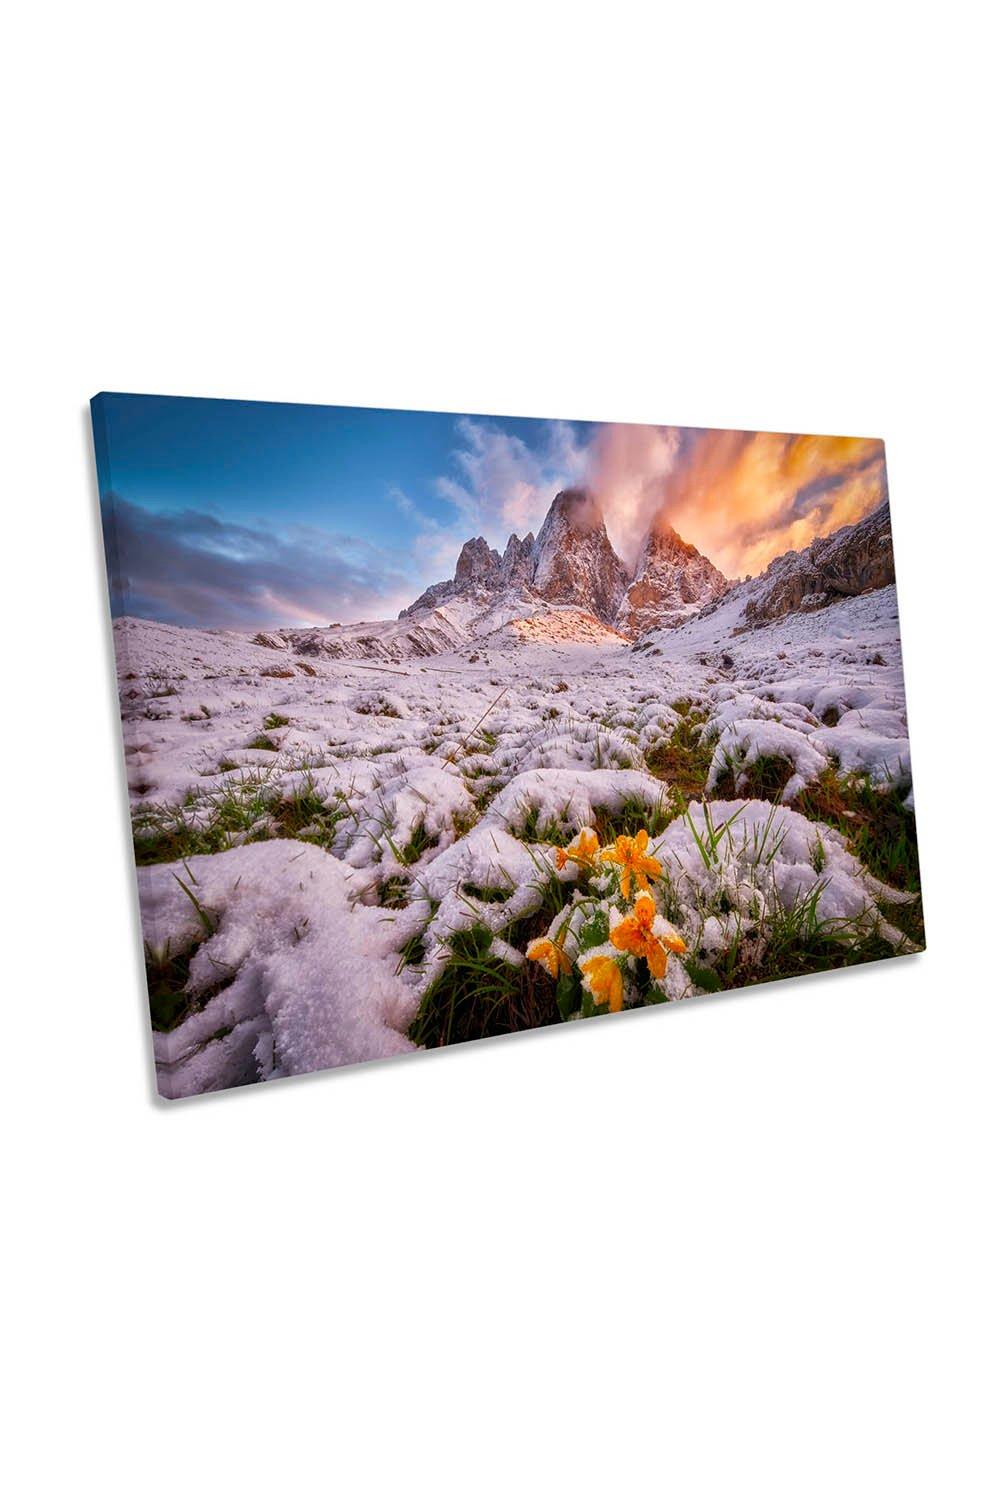 Frozen Sunrise Frosty Mountains Flowers Canvas Wall Art Picture Print